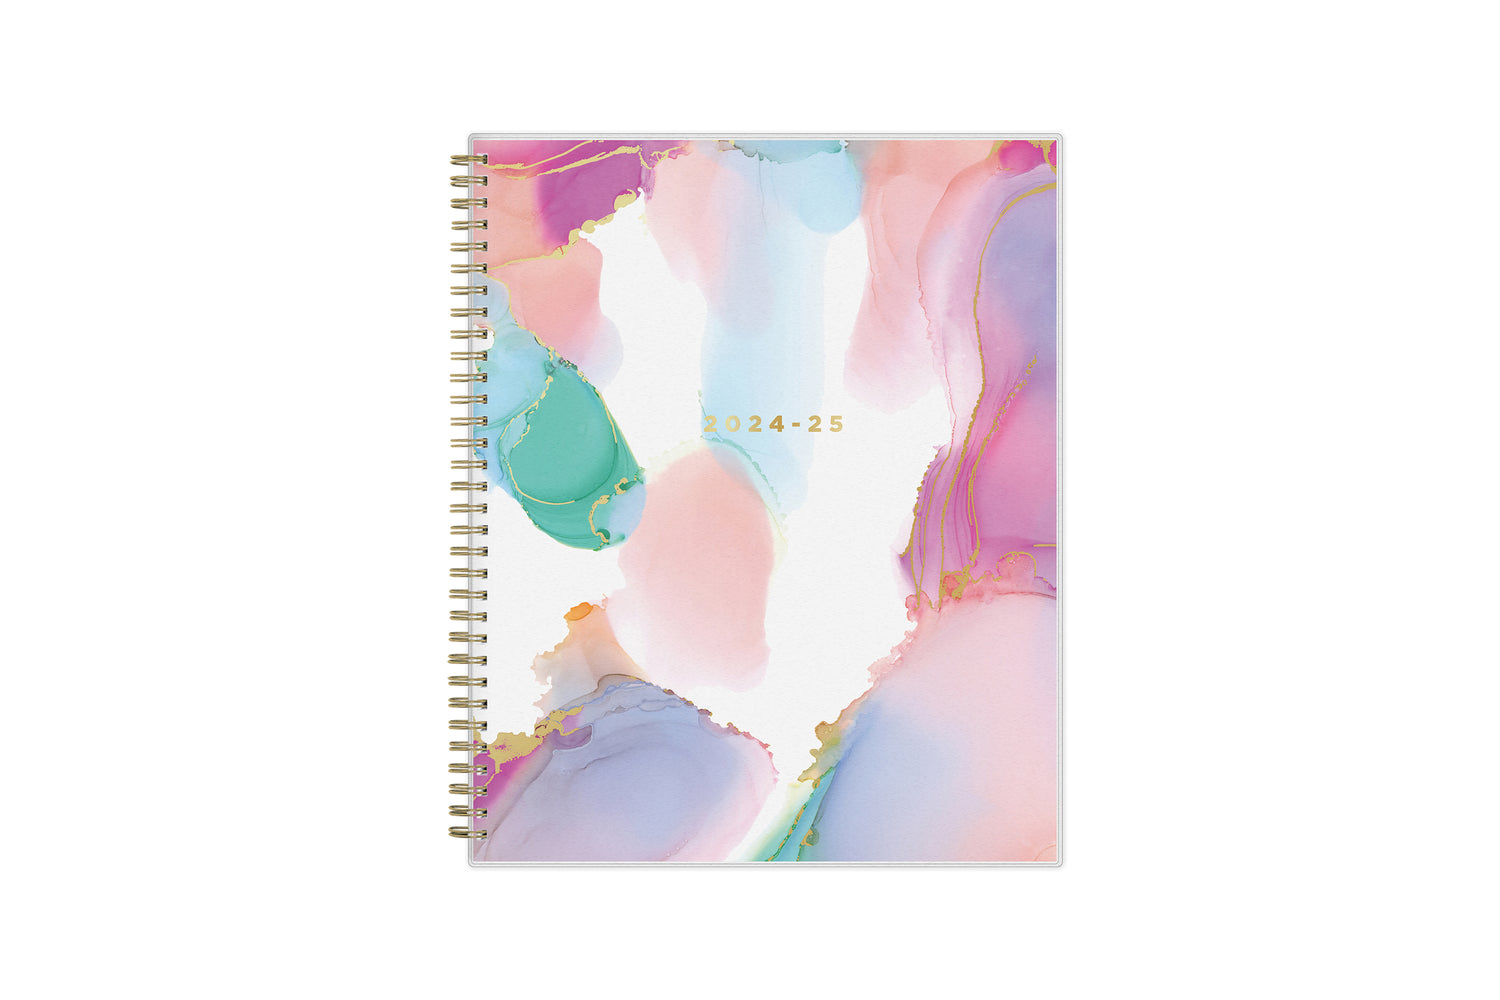 weekly monthly planner by Ashley g for blue sky featuring a marble like pattern front cover and gold twin wire-o binding in 8.5x11 size